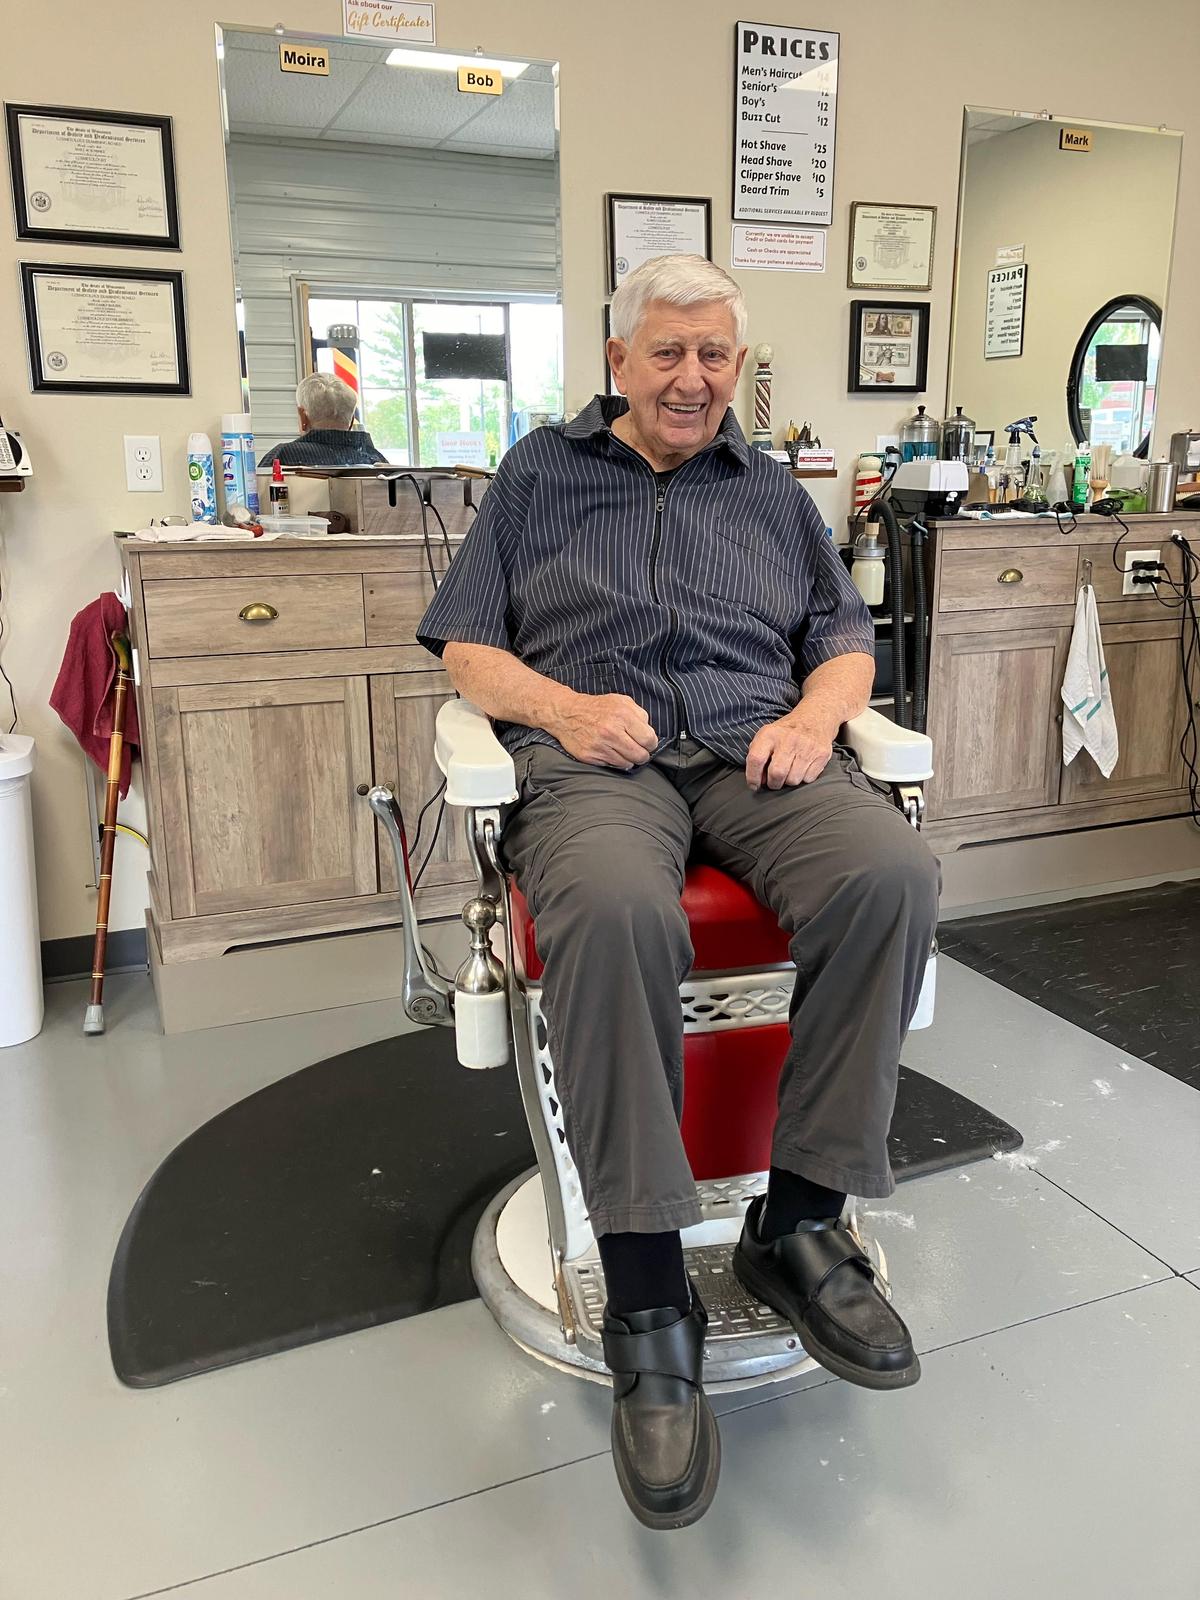 Robert Rohloff, 91, runs Bob’s Old Fashioned Barbershop in Hortonville. The shop houses old-fashioned equipment to emulate his father's shop, including a 100-year-old customer chair. (Courtesy of Mark Karweick)